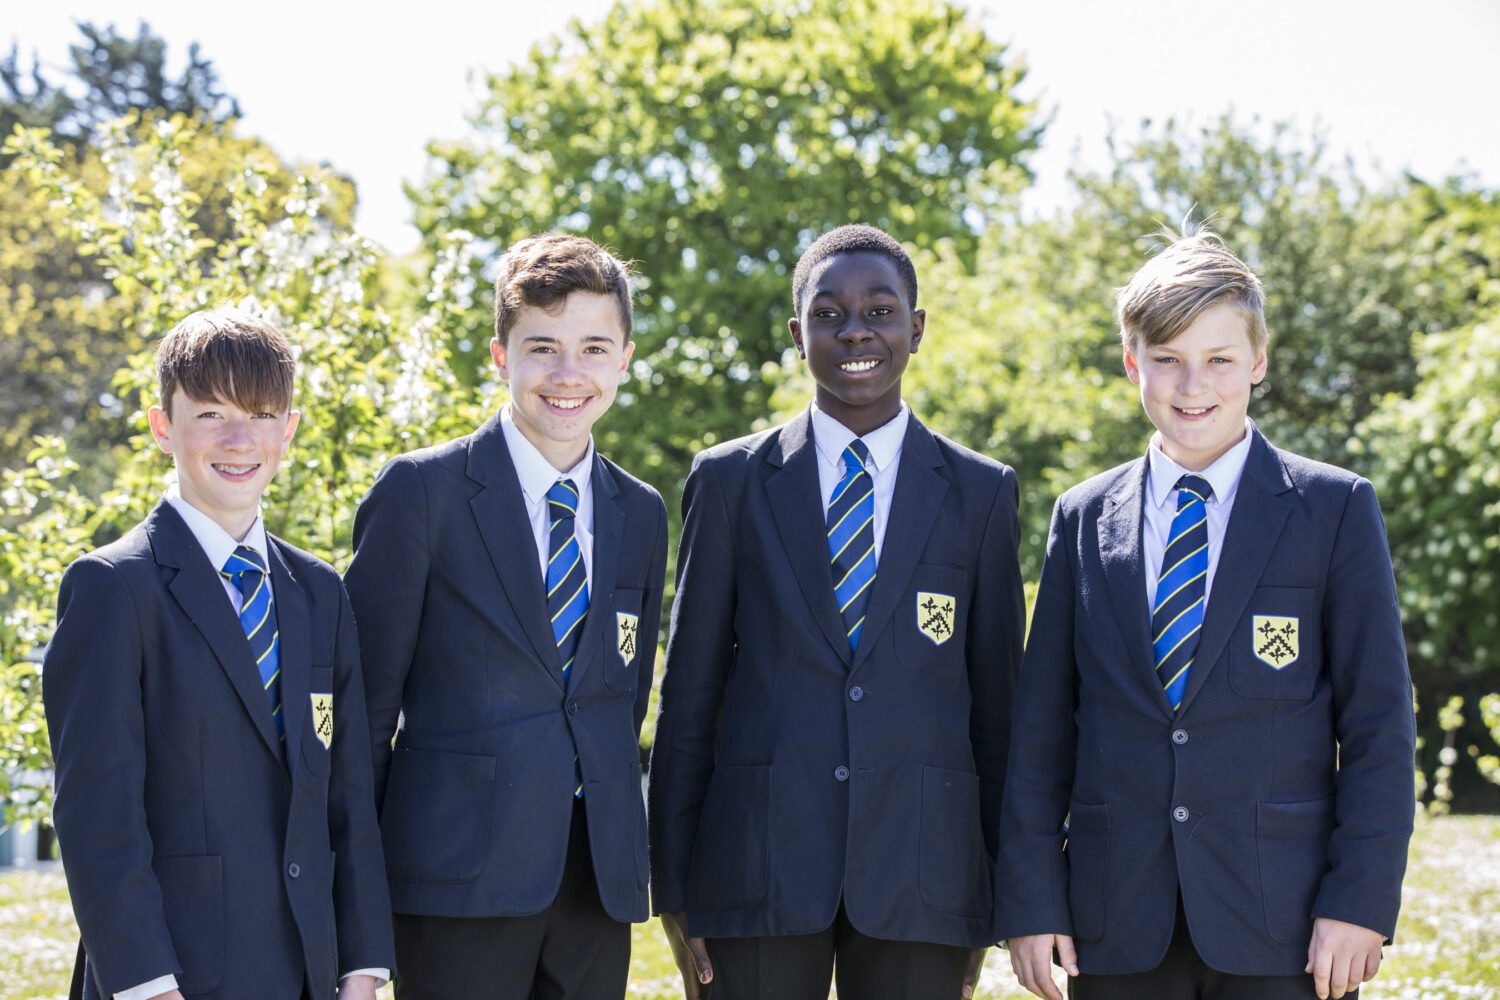 Four students from SJWMS stood in a leafy area wearing their school uniform